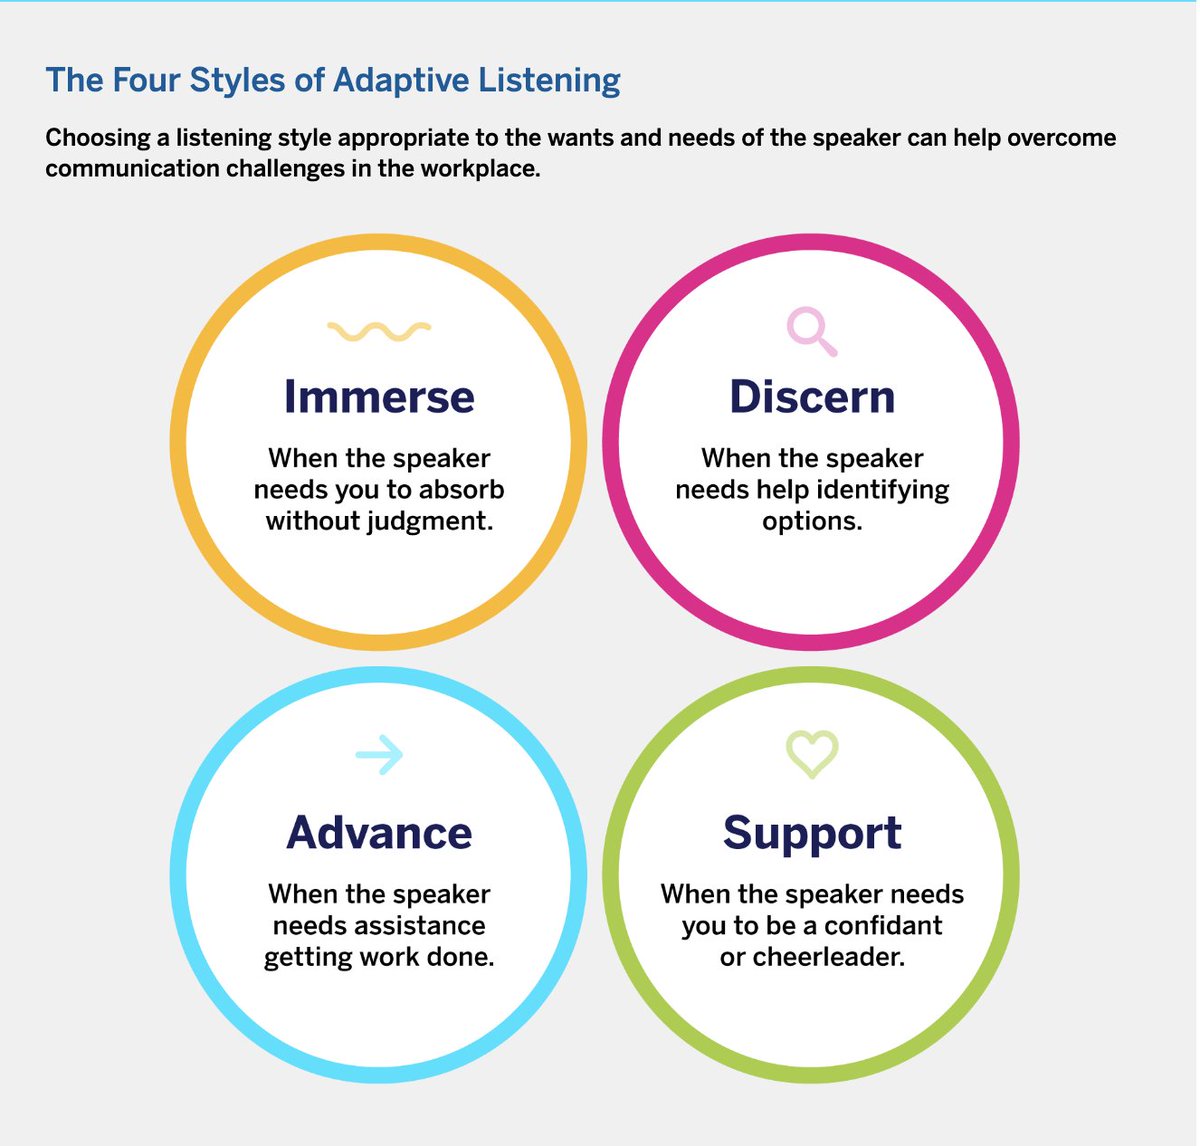 An interesting article offering four styles of listening and some guidance on when to adopt which approach sloanreview.mit.edu/article/broade…